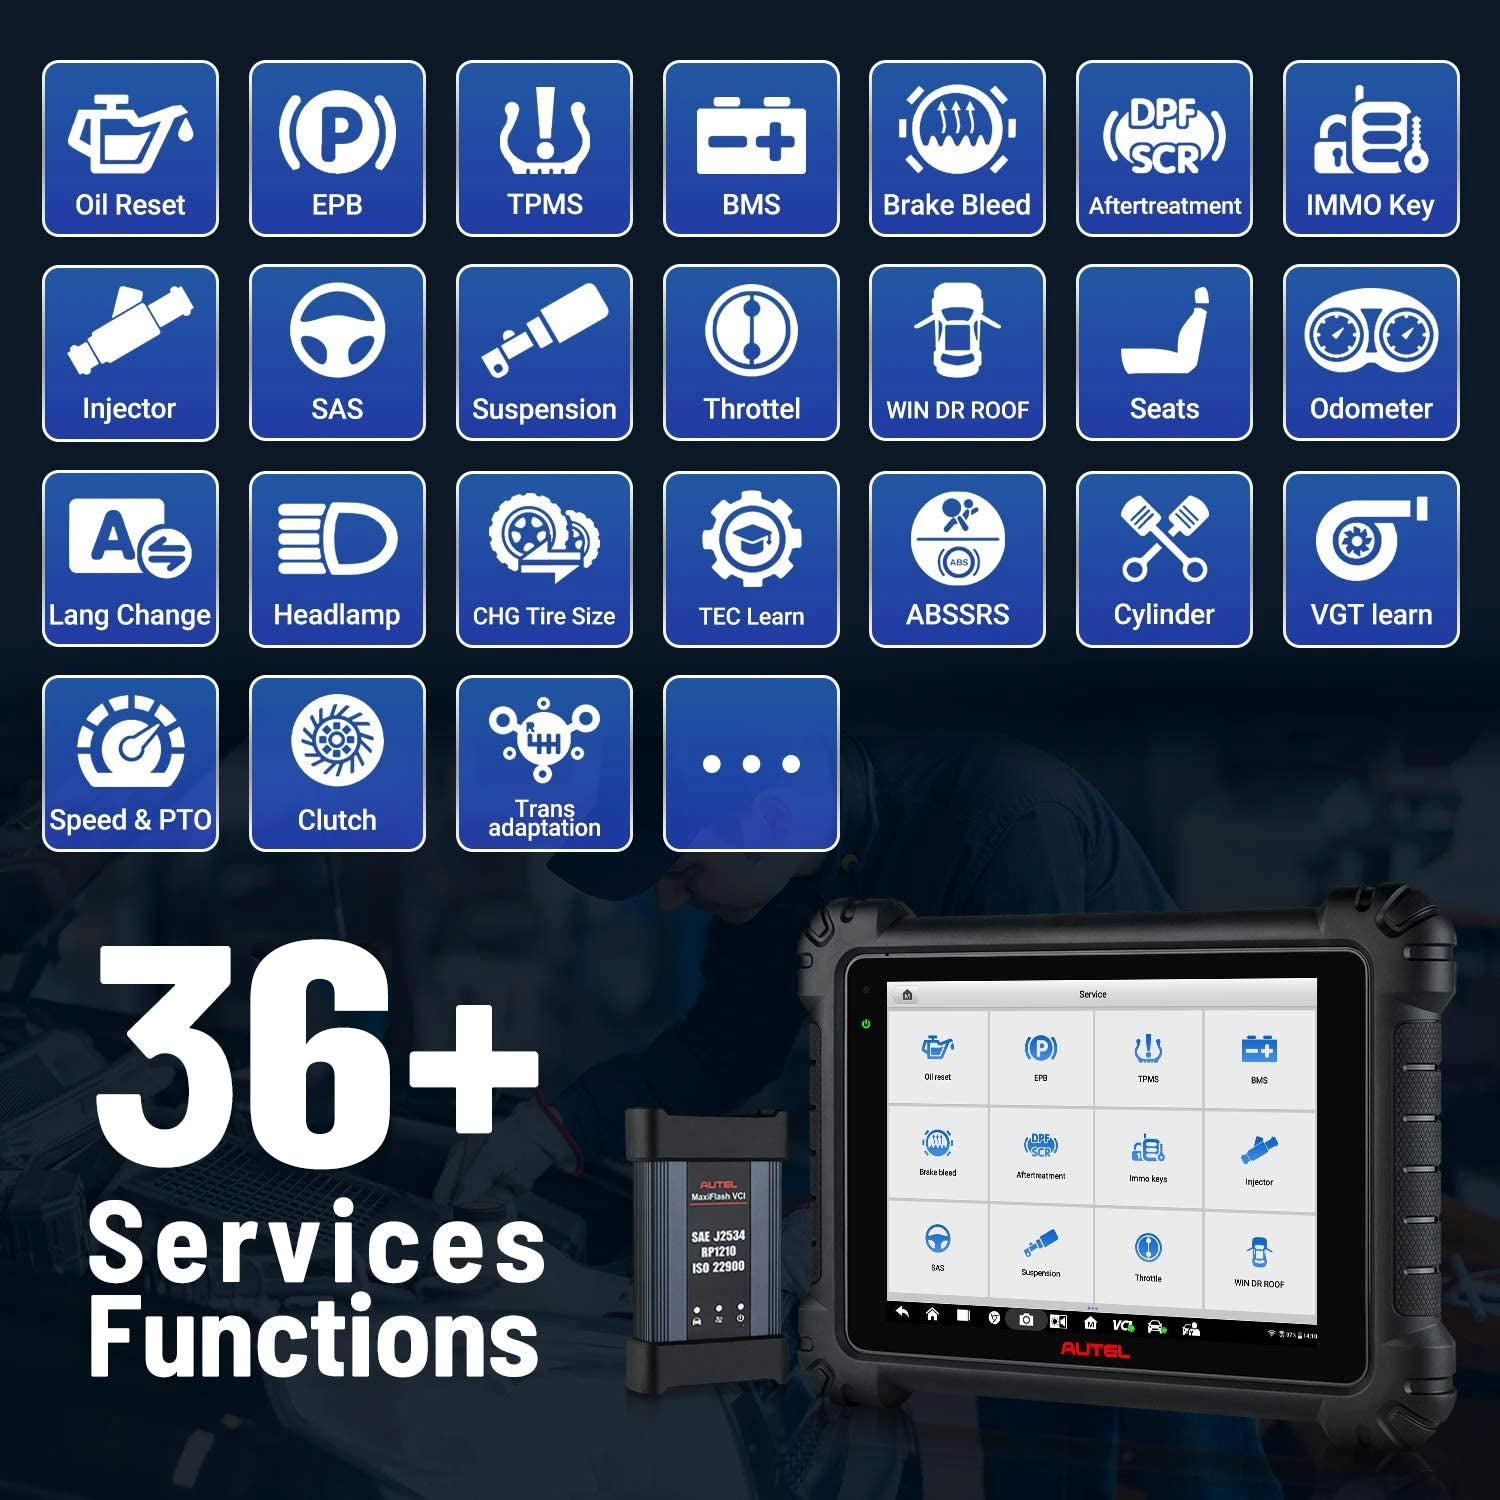 Autel Maxisys Ultra Lite Automotive Full System Diagnostic Tool Car Scanner provides 36+ service functions.